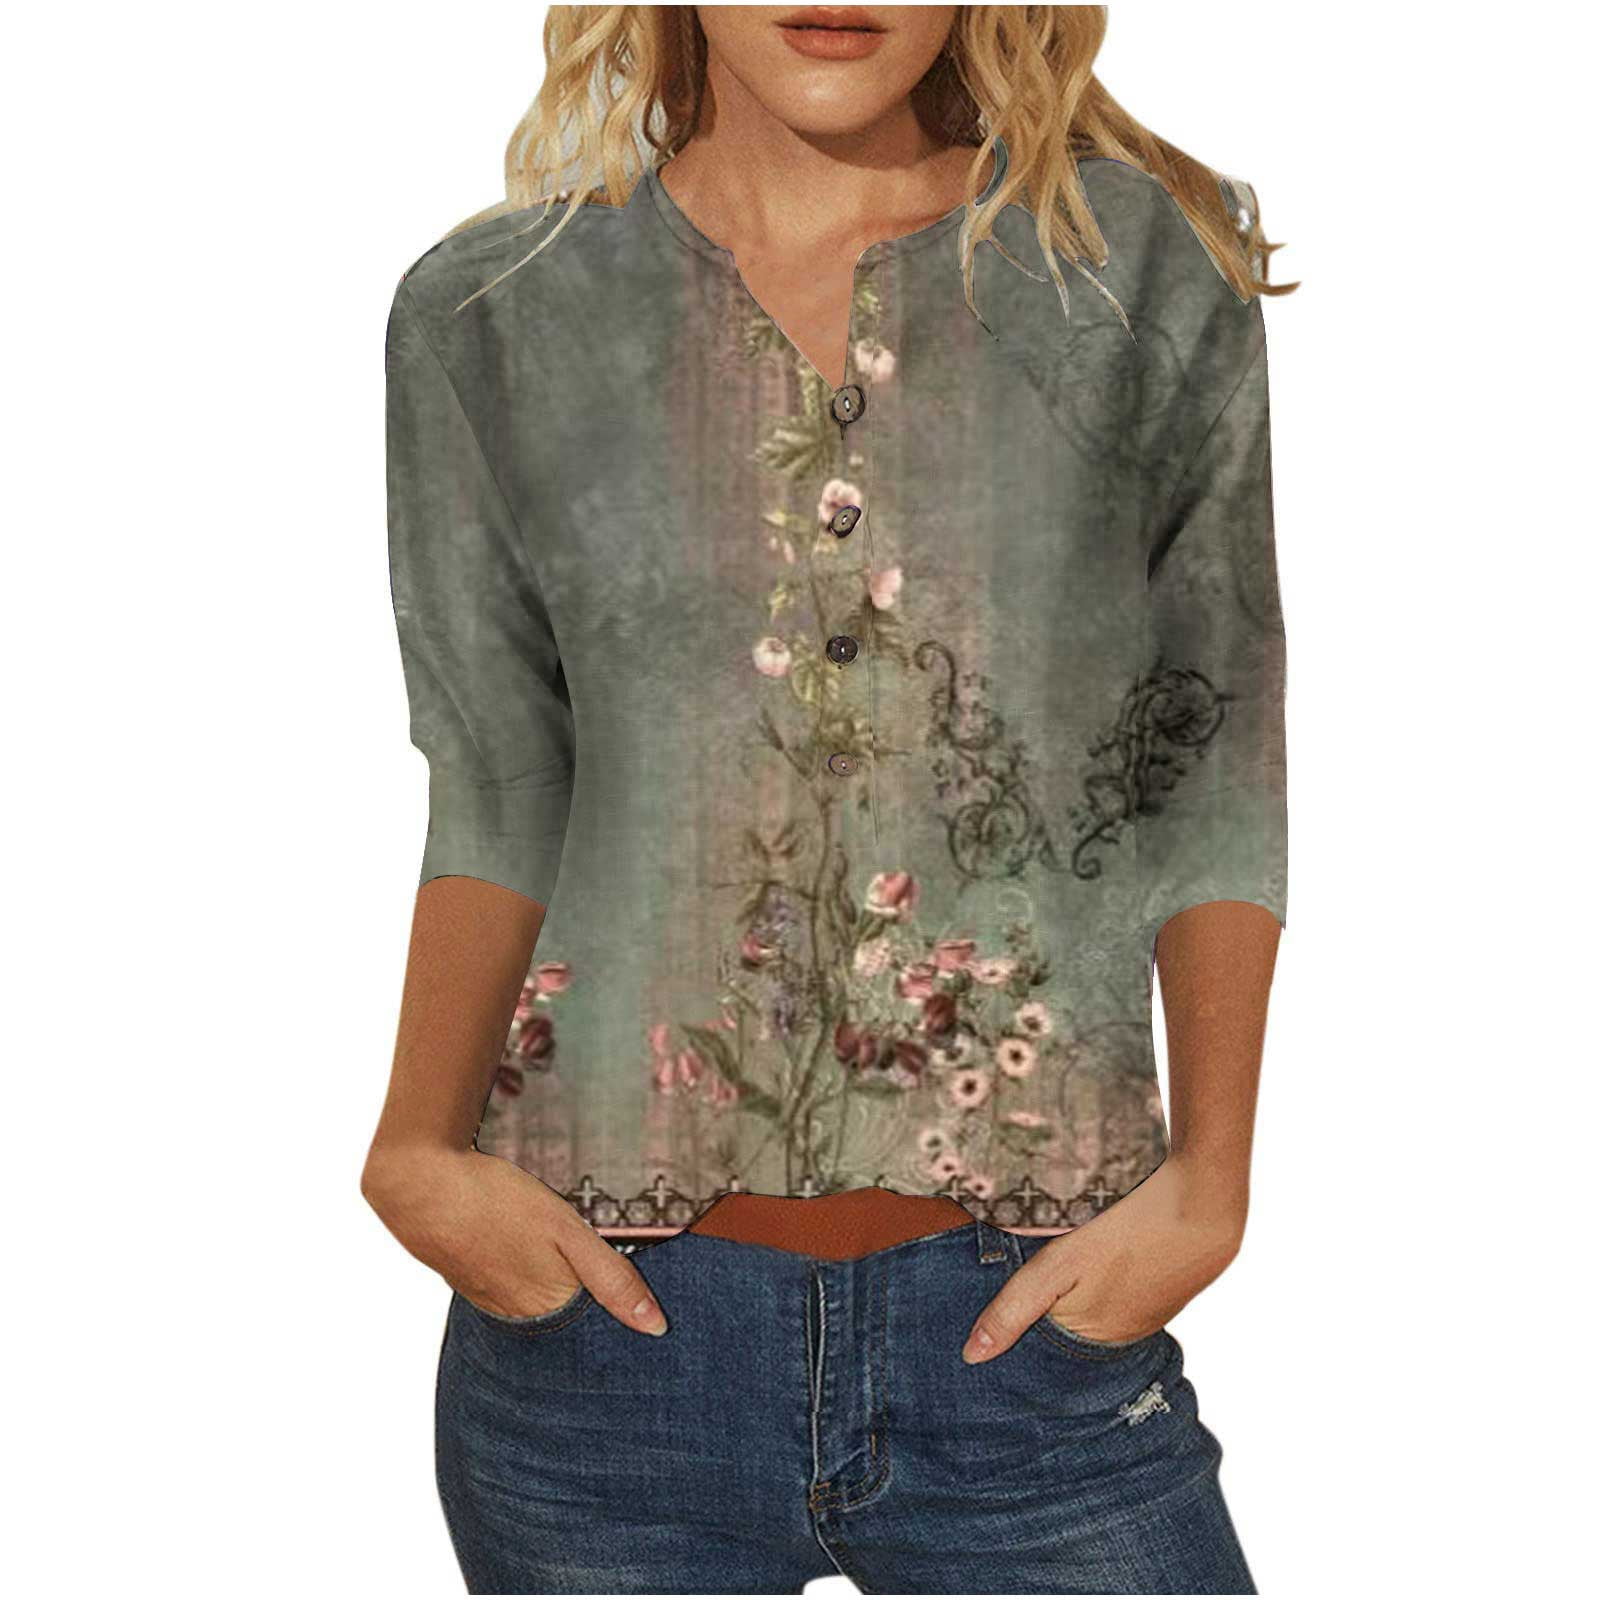 Women Summer Printed Fashion Button Shirts Blouse Casual 3/4 Sleeve Cotton  Tops